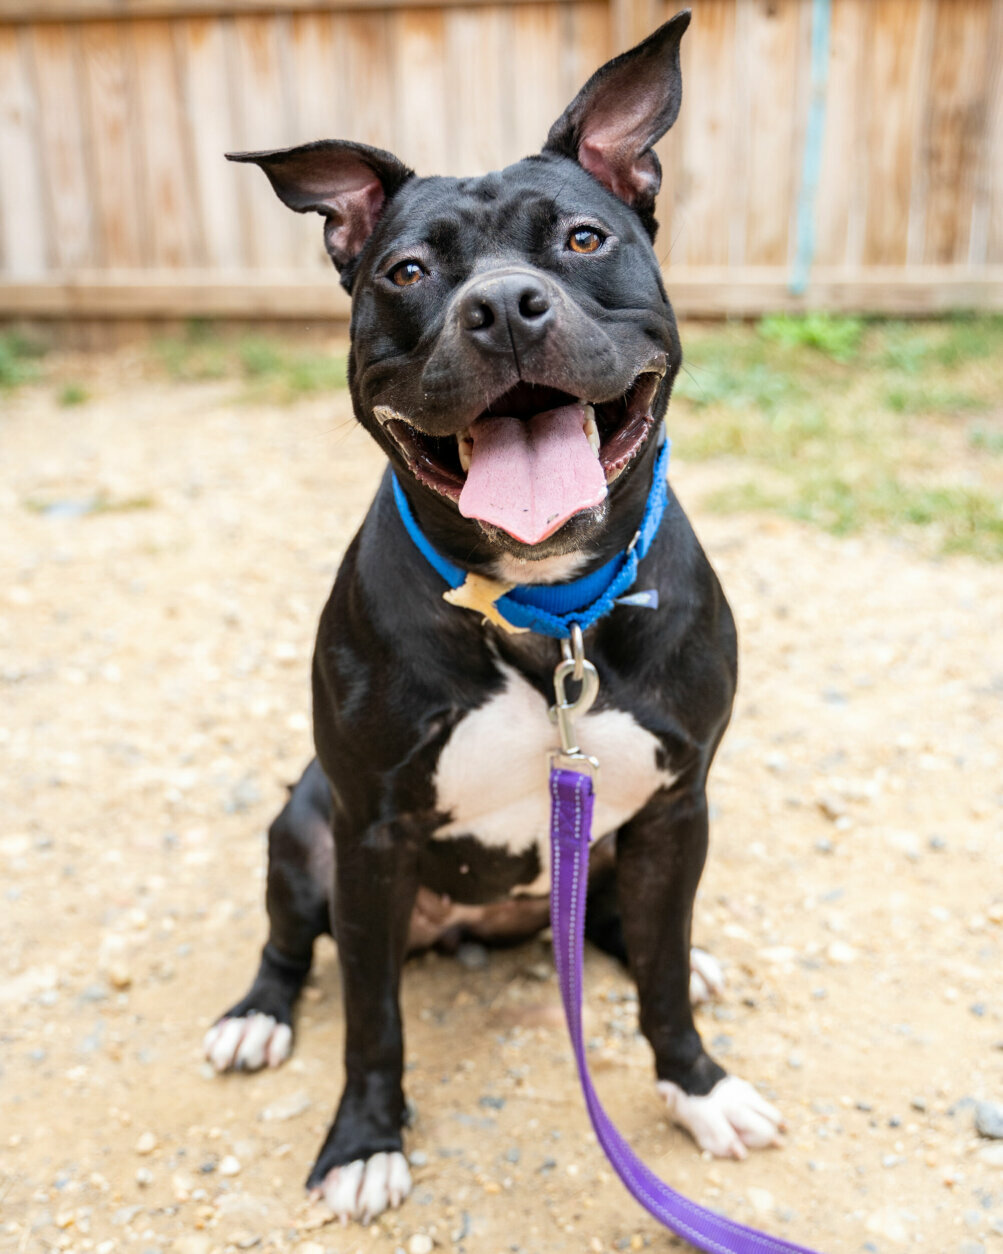 <p>Meet Sheena! At just two years old this sweet girl is the life of the party. Sheena has been working hard with HRA&#8217;s behavior team to learn some basic puppy manners and has been having a blast with training. We&#8217;d love to help Sheena find a family where she can continue her training and get lots of enrichment. In return she&#8217;ll give you endless love and attention. Do you think Sheena is the bff for you? To learn more and set up a virtual meet and greet visit humanerescuealliance.org/adopt.</p>
